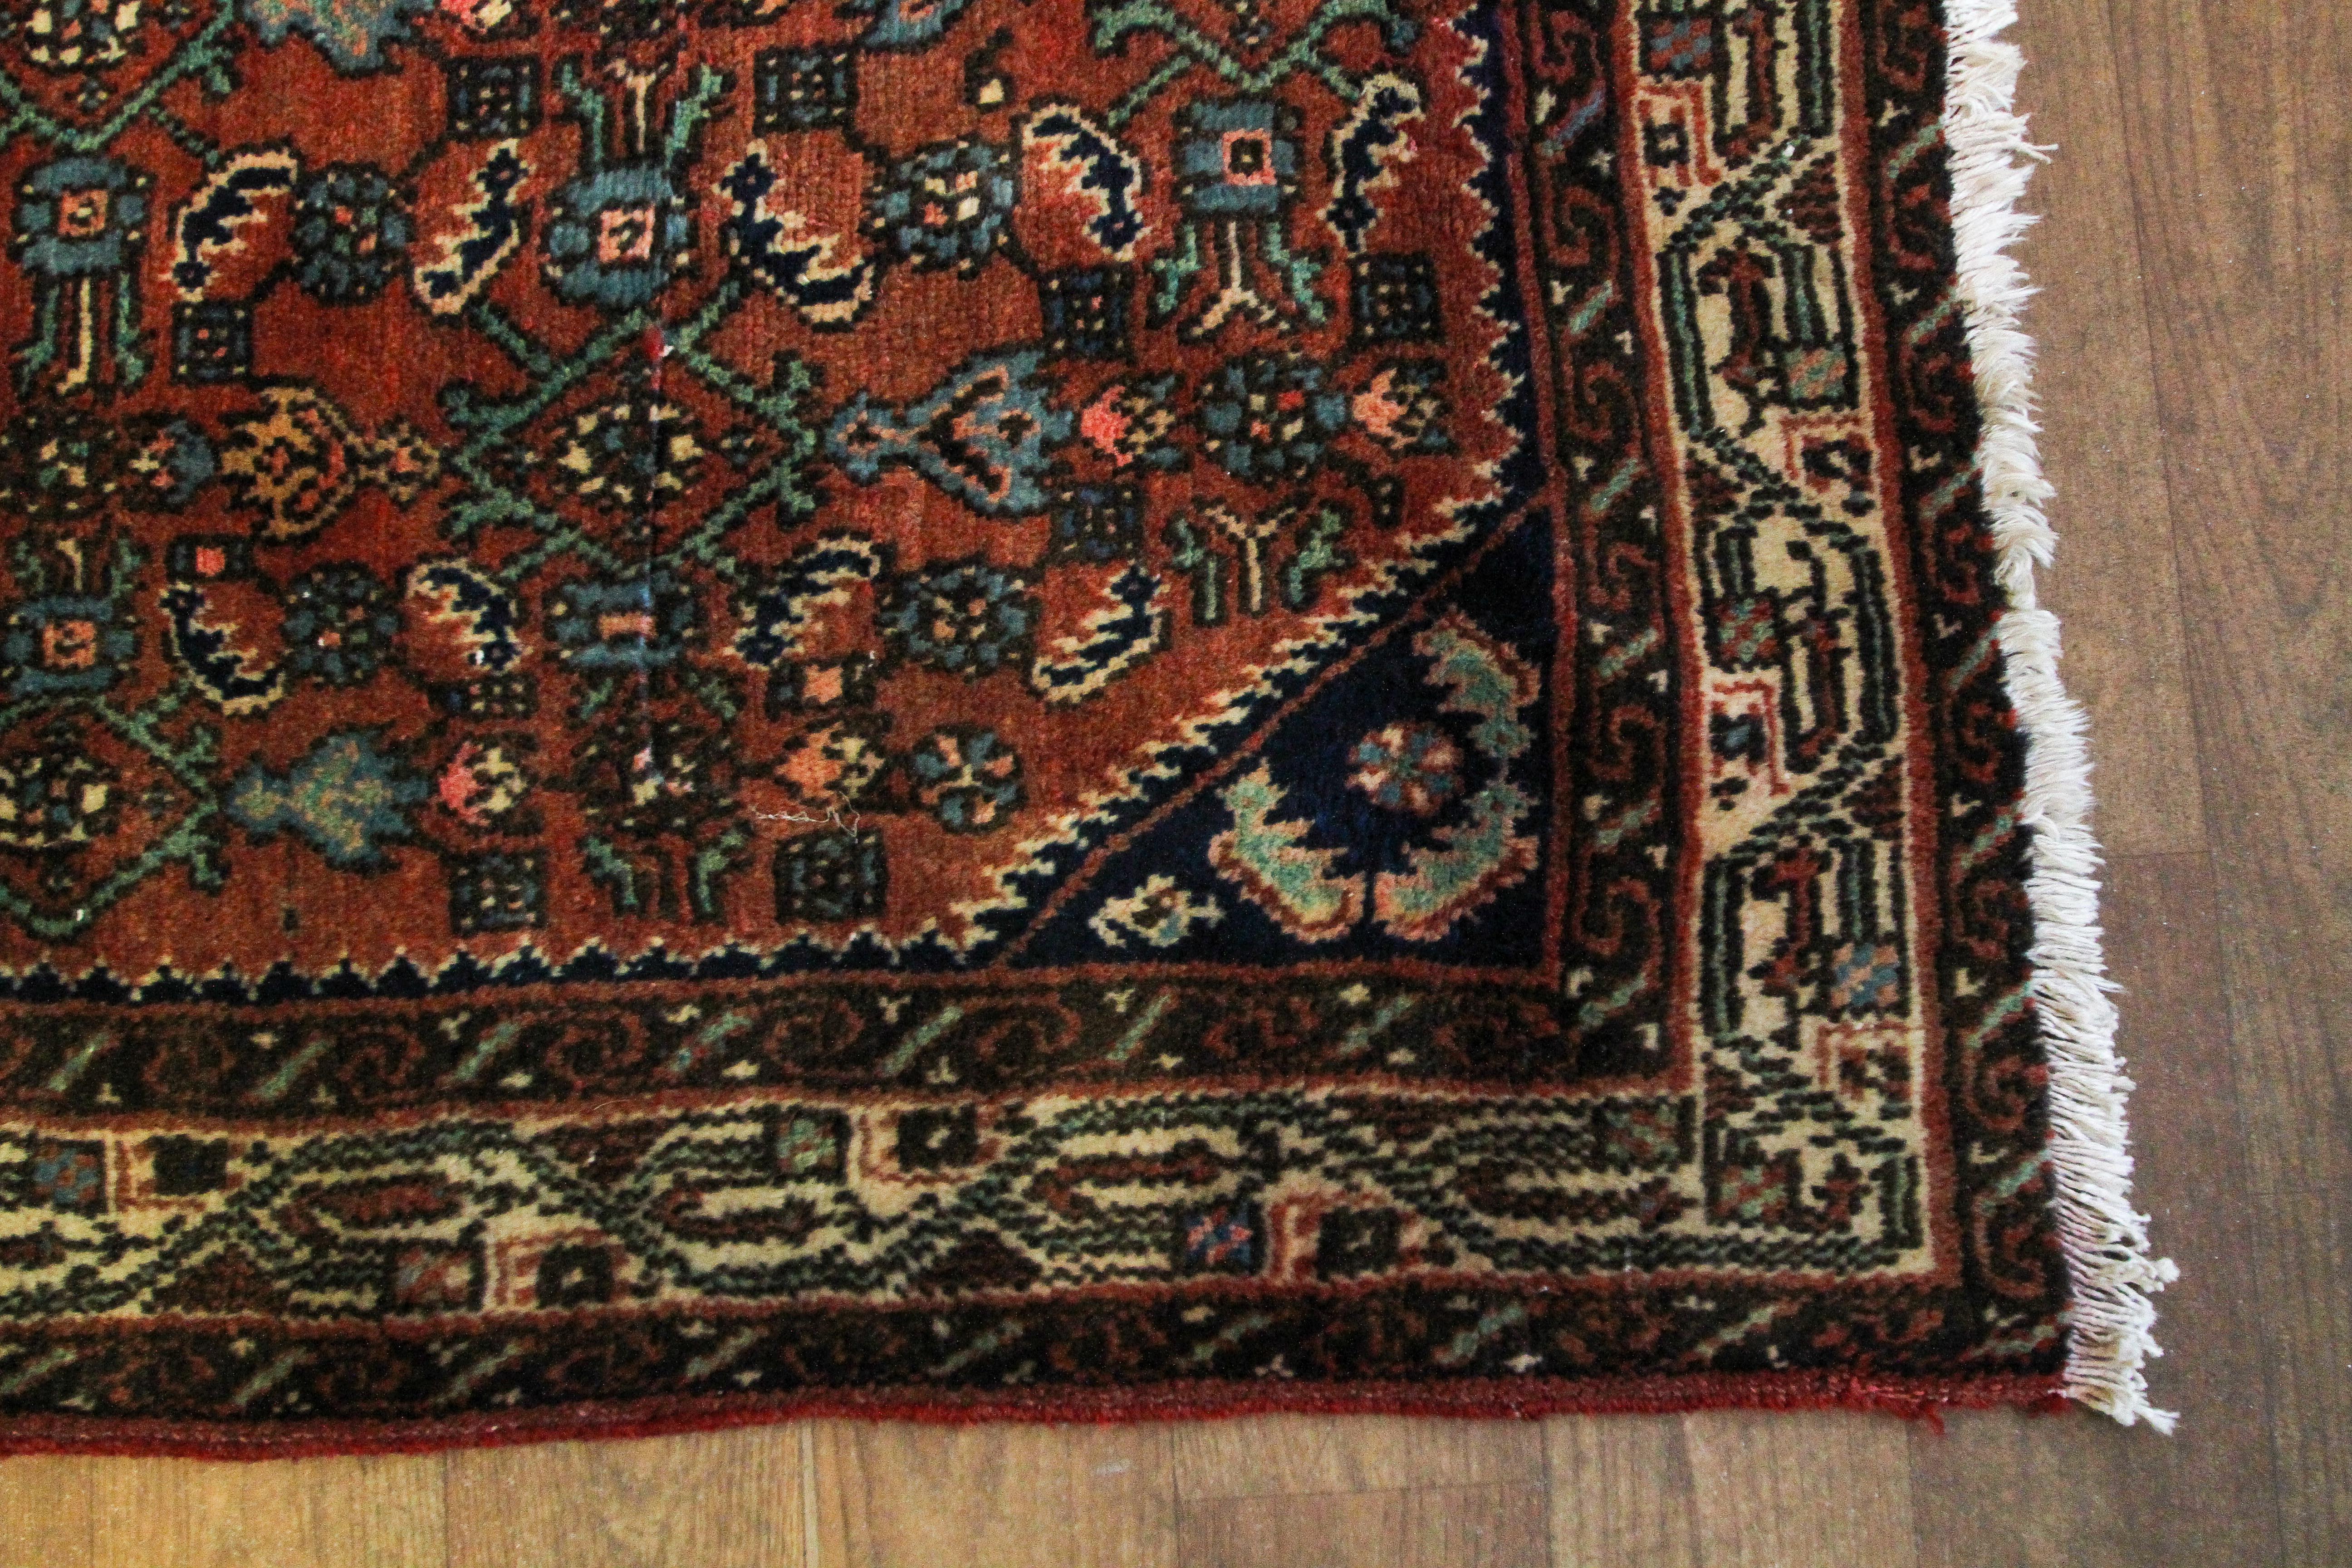 A Hamedan dark red ground rug, woven with a repeated geometric design in cream, blue and red. - Image 2 of 3